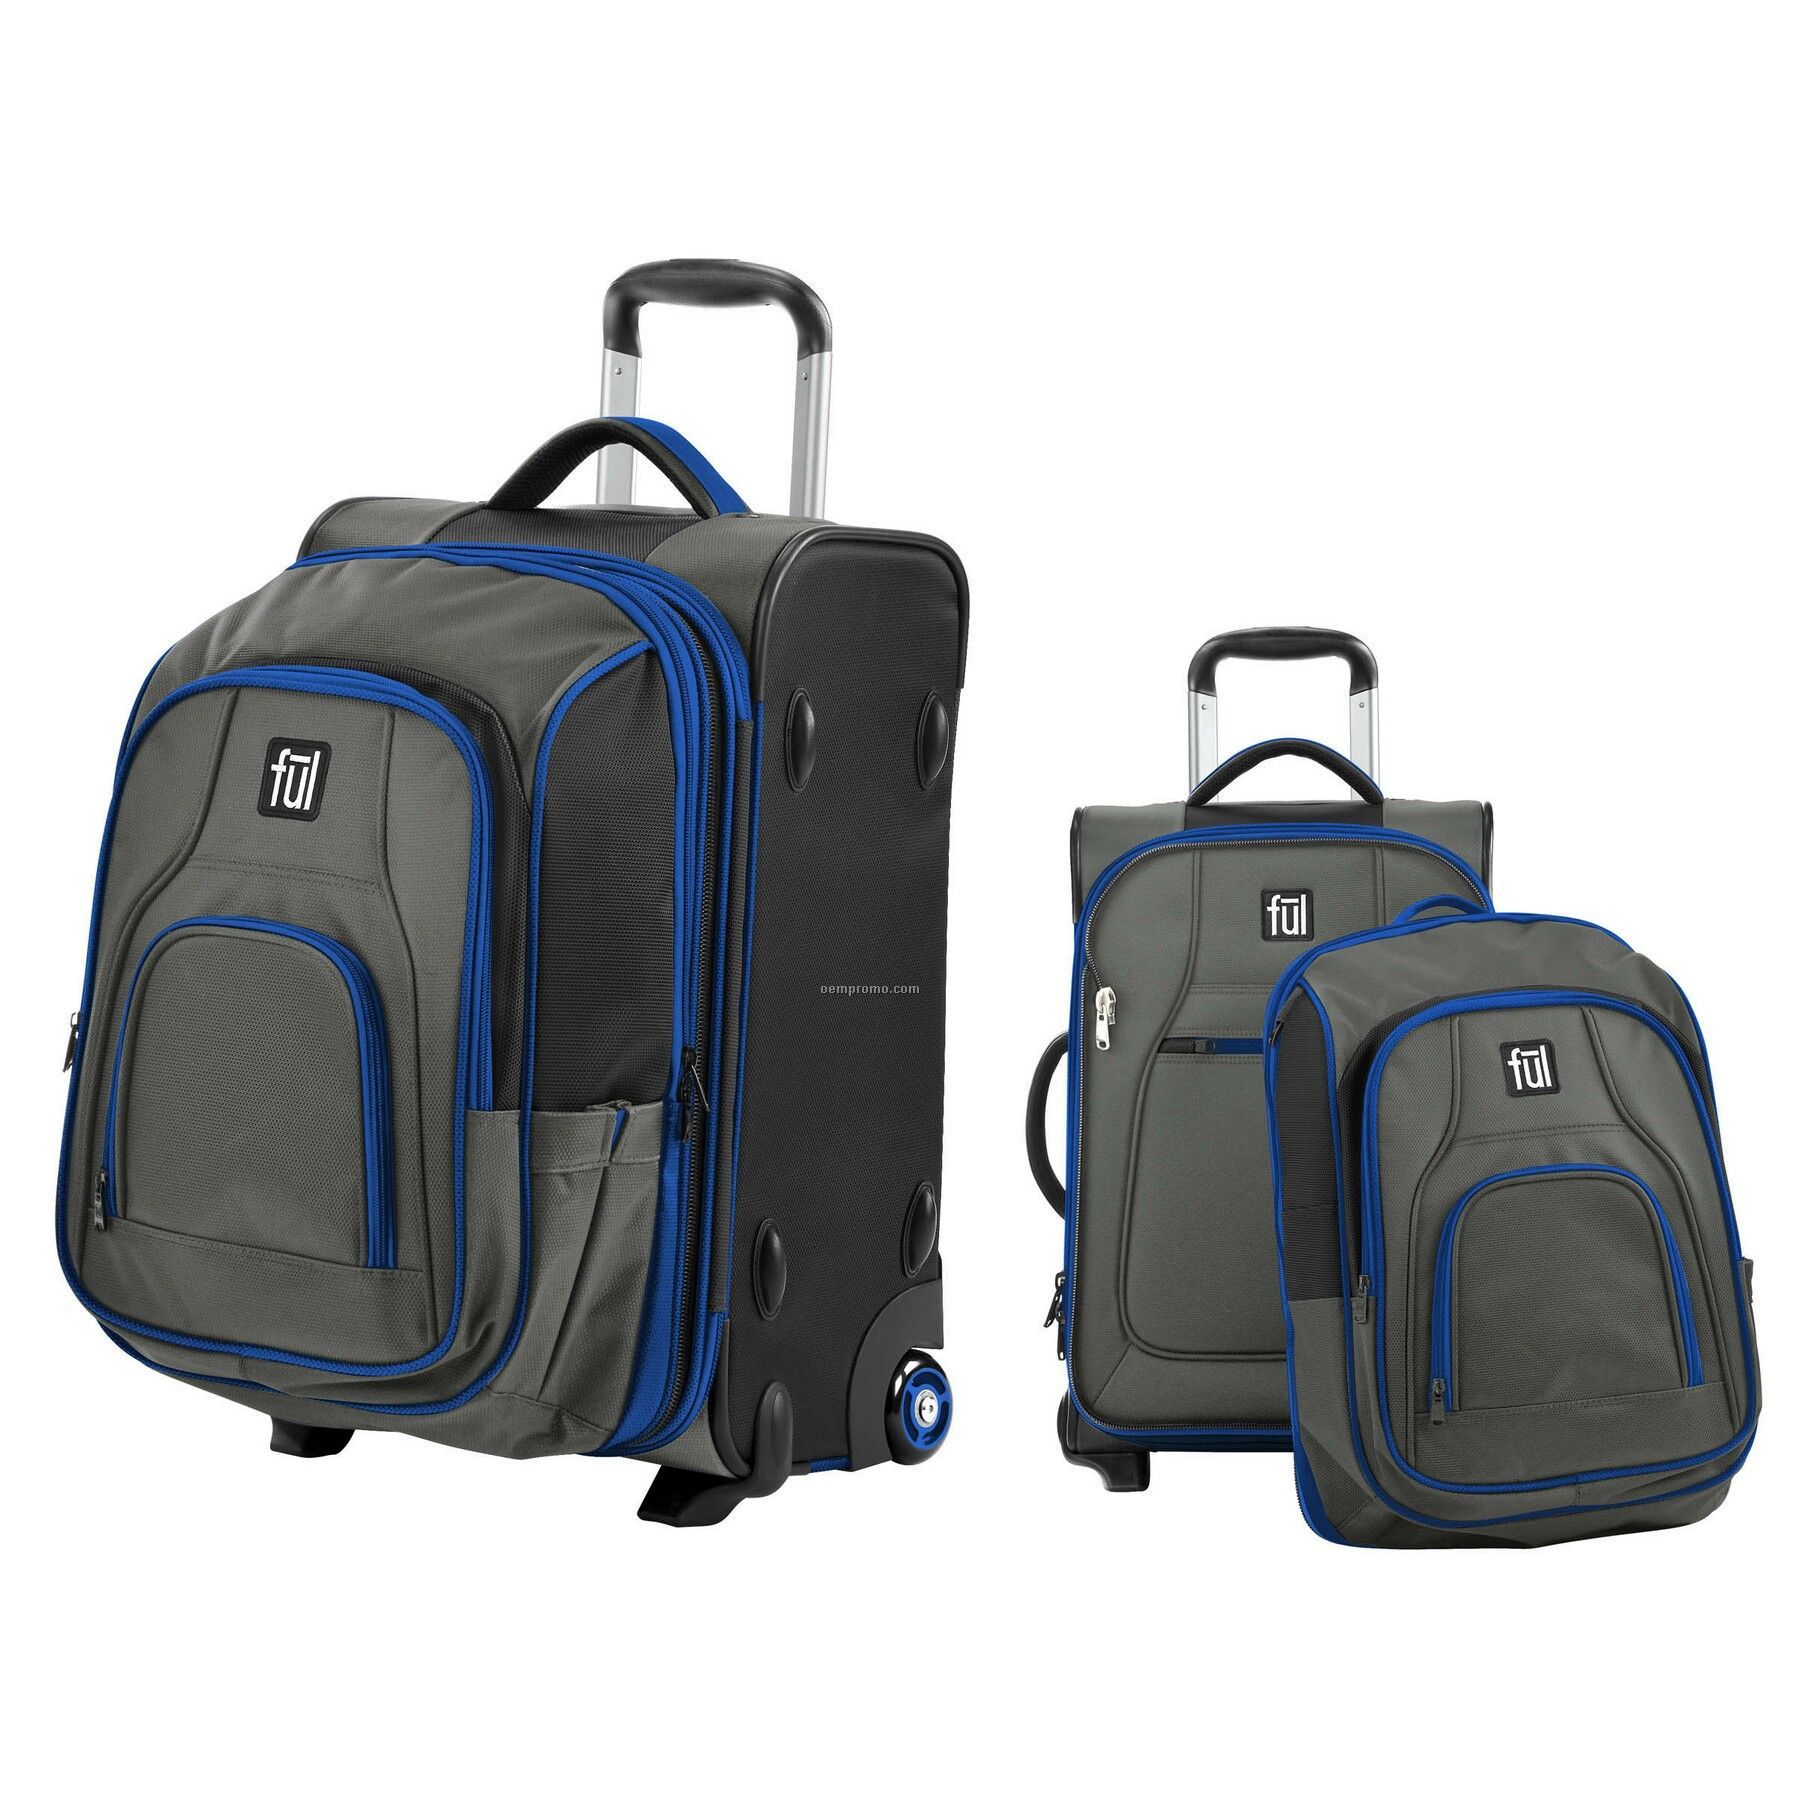 Ful Double Take 21" Wheeled Luggage With Zip-on Backpack Combo